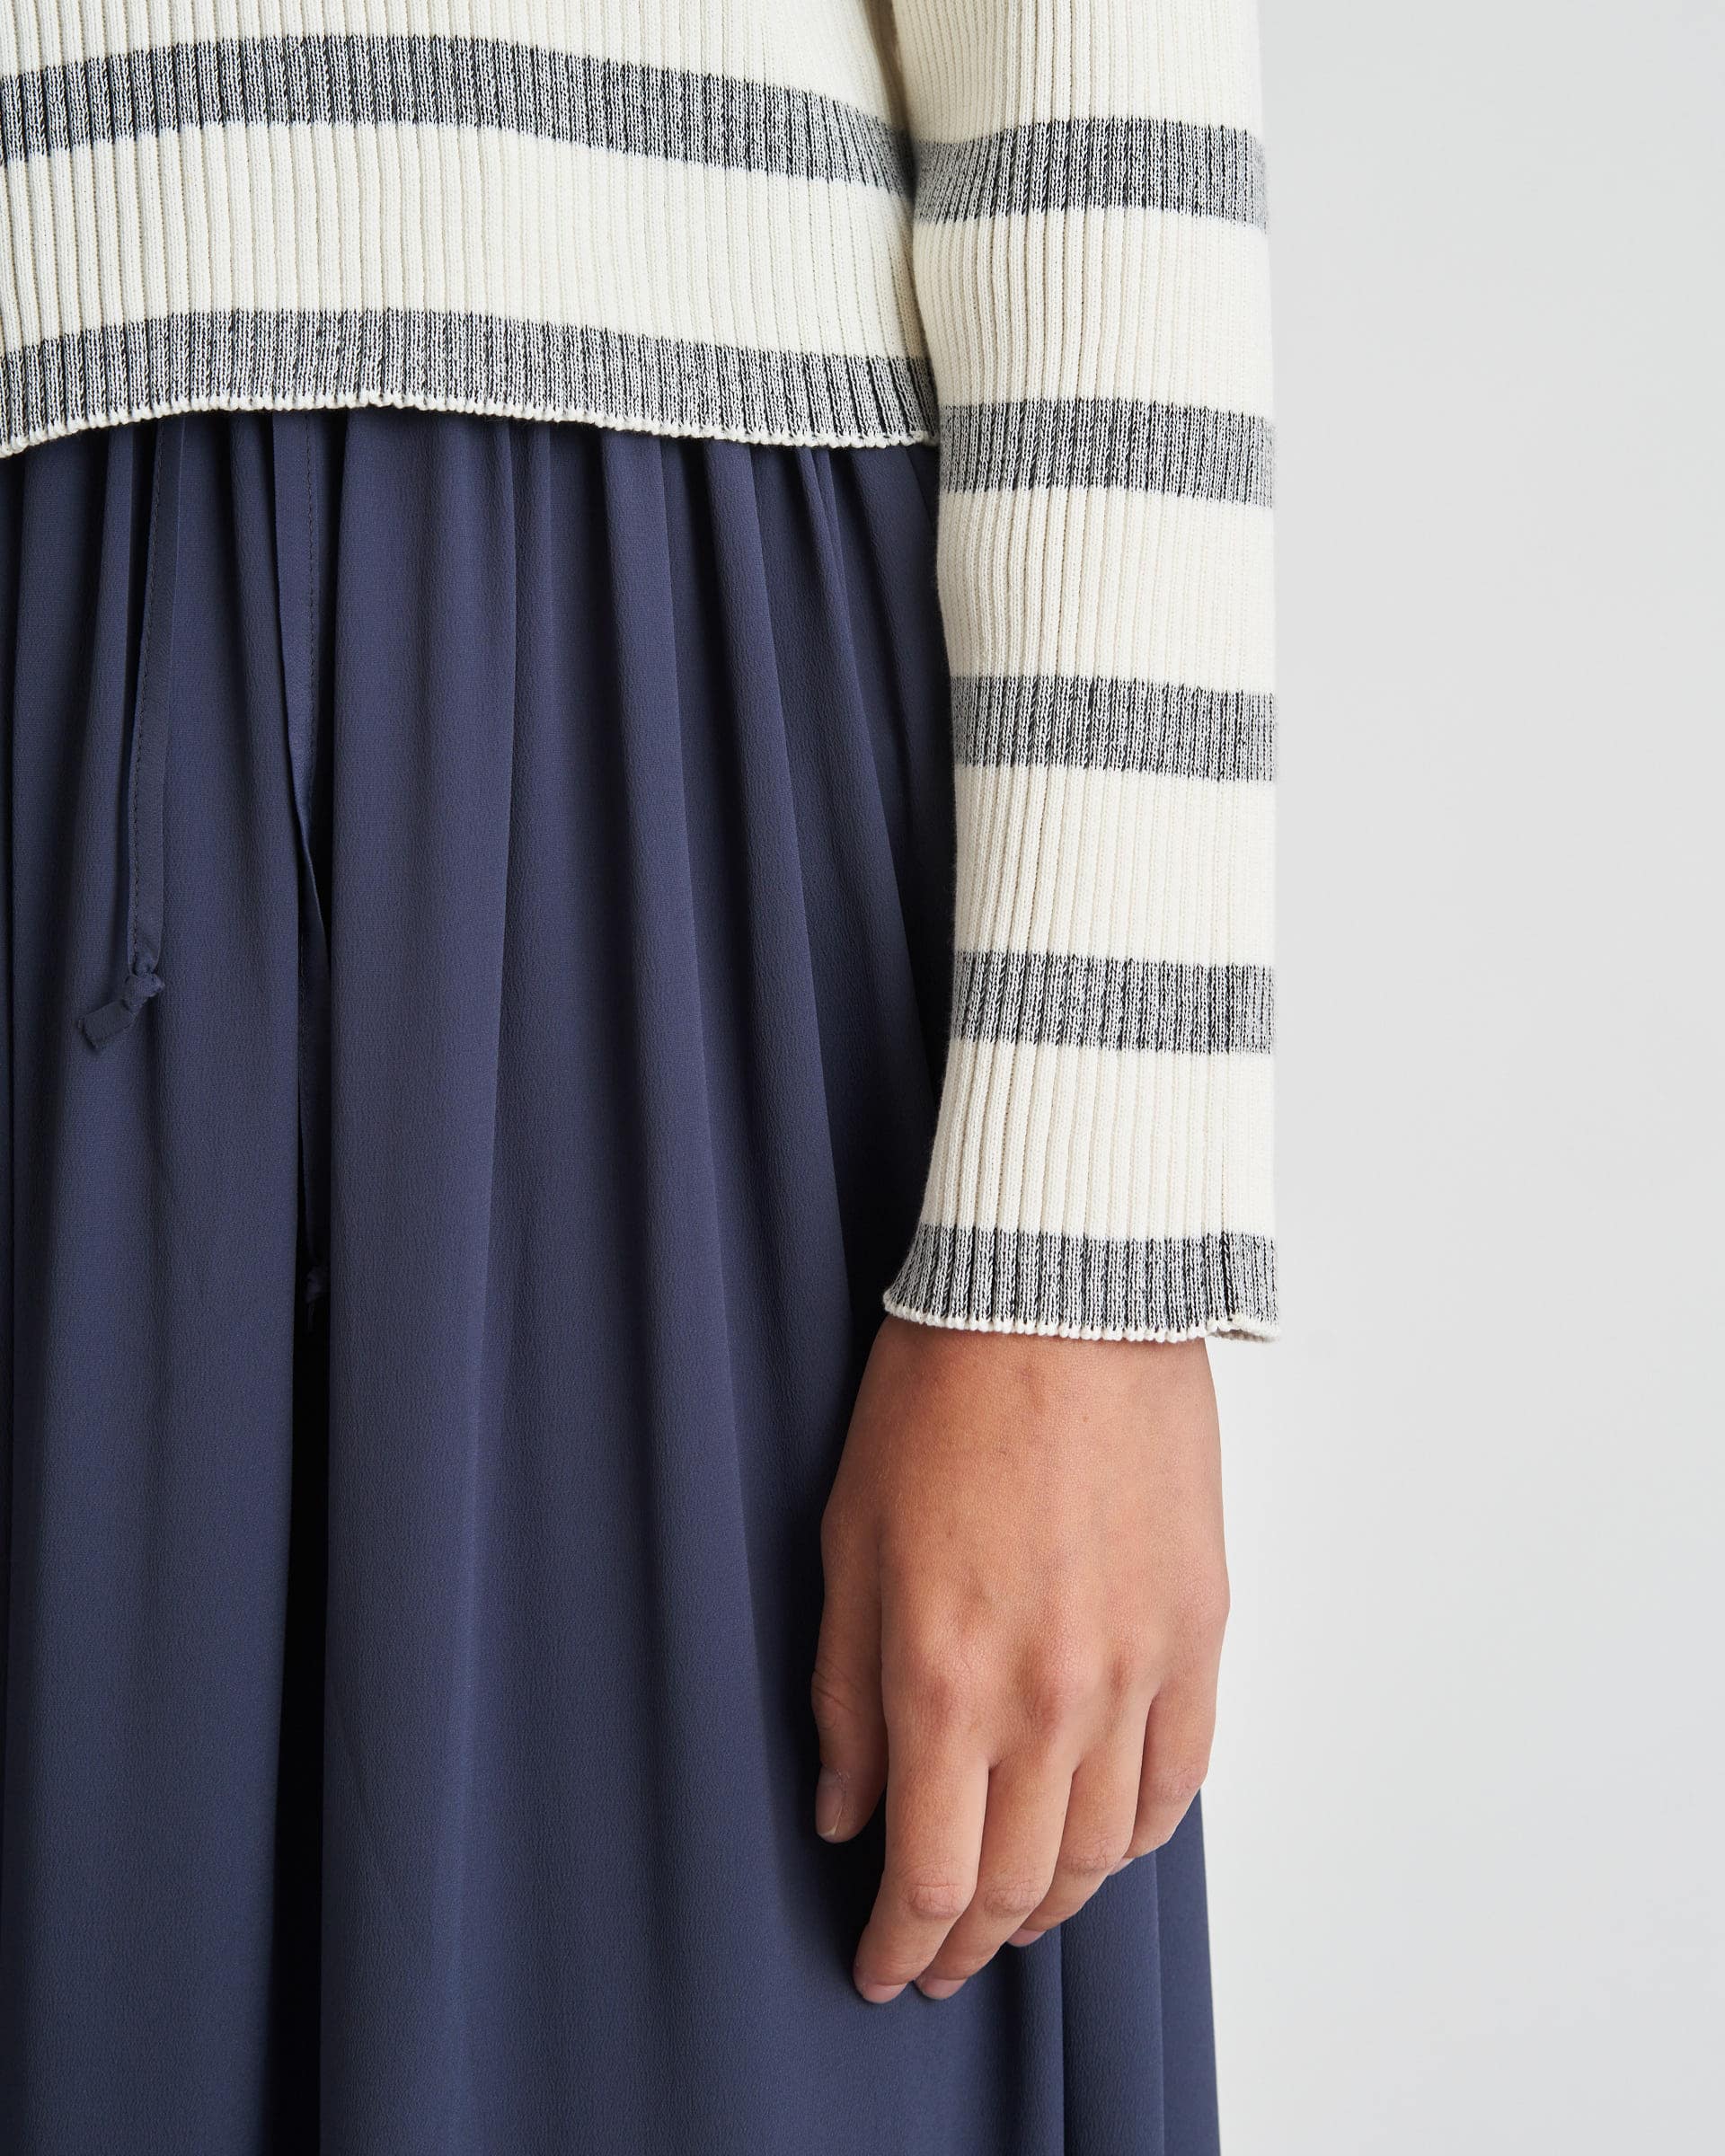 The Market Store | Curled Midi Skirt